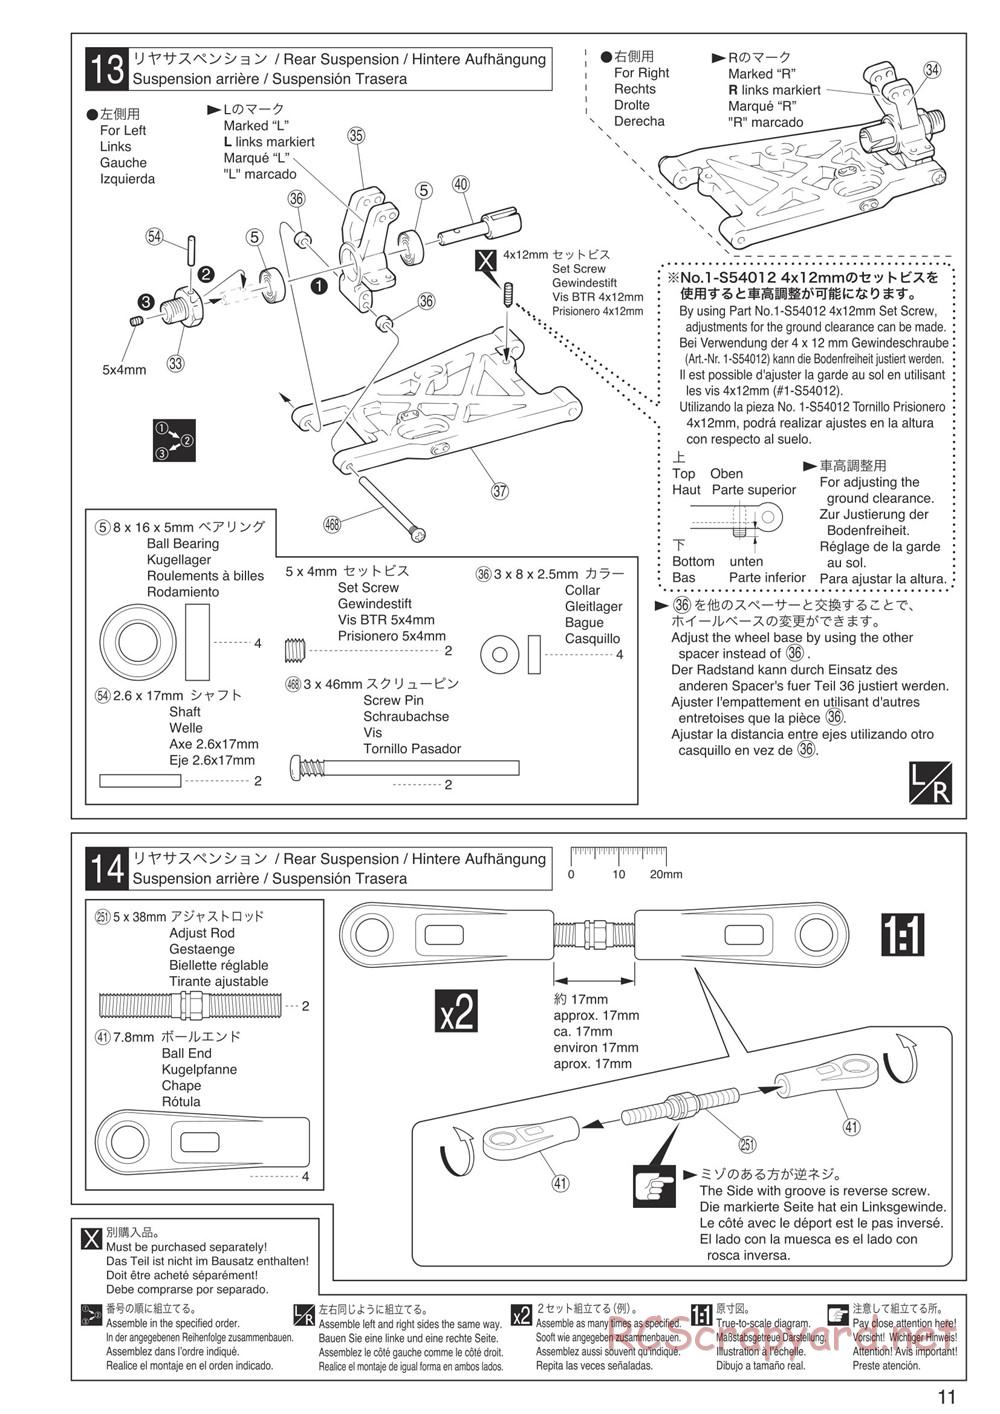 Kyosho - Inferno Neo 3.0 - Manual - Page 11